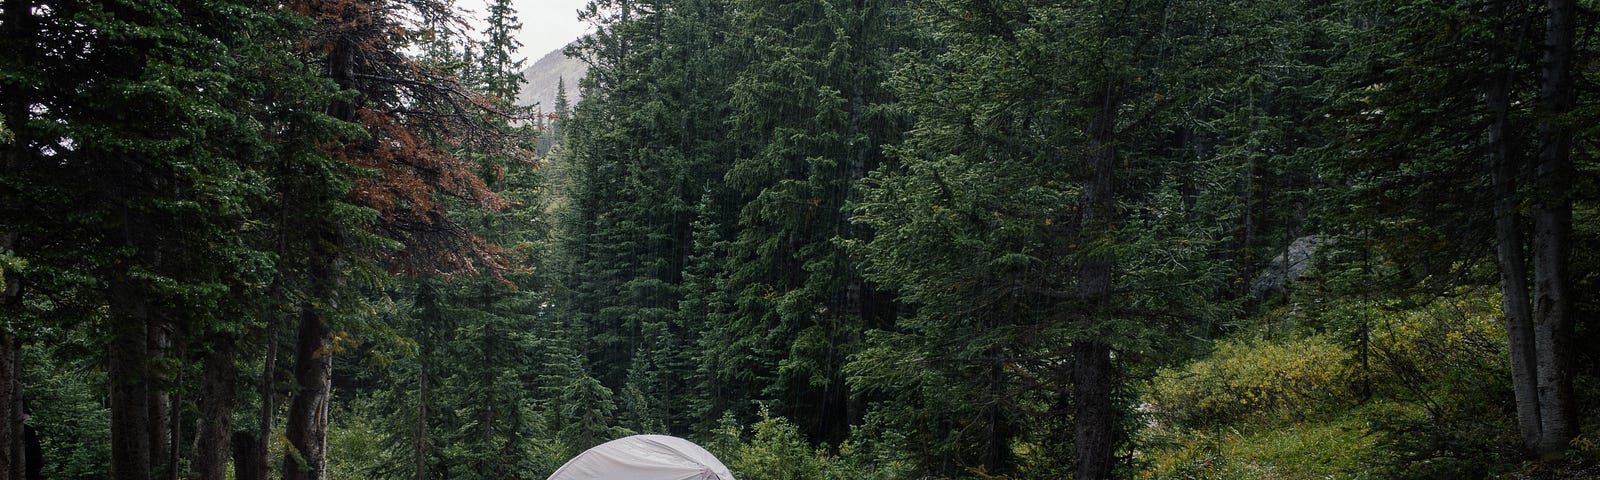 Tent on dirt area surrounded by pines.